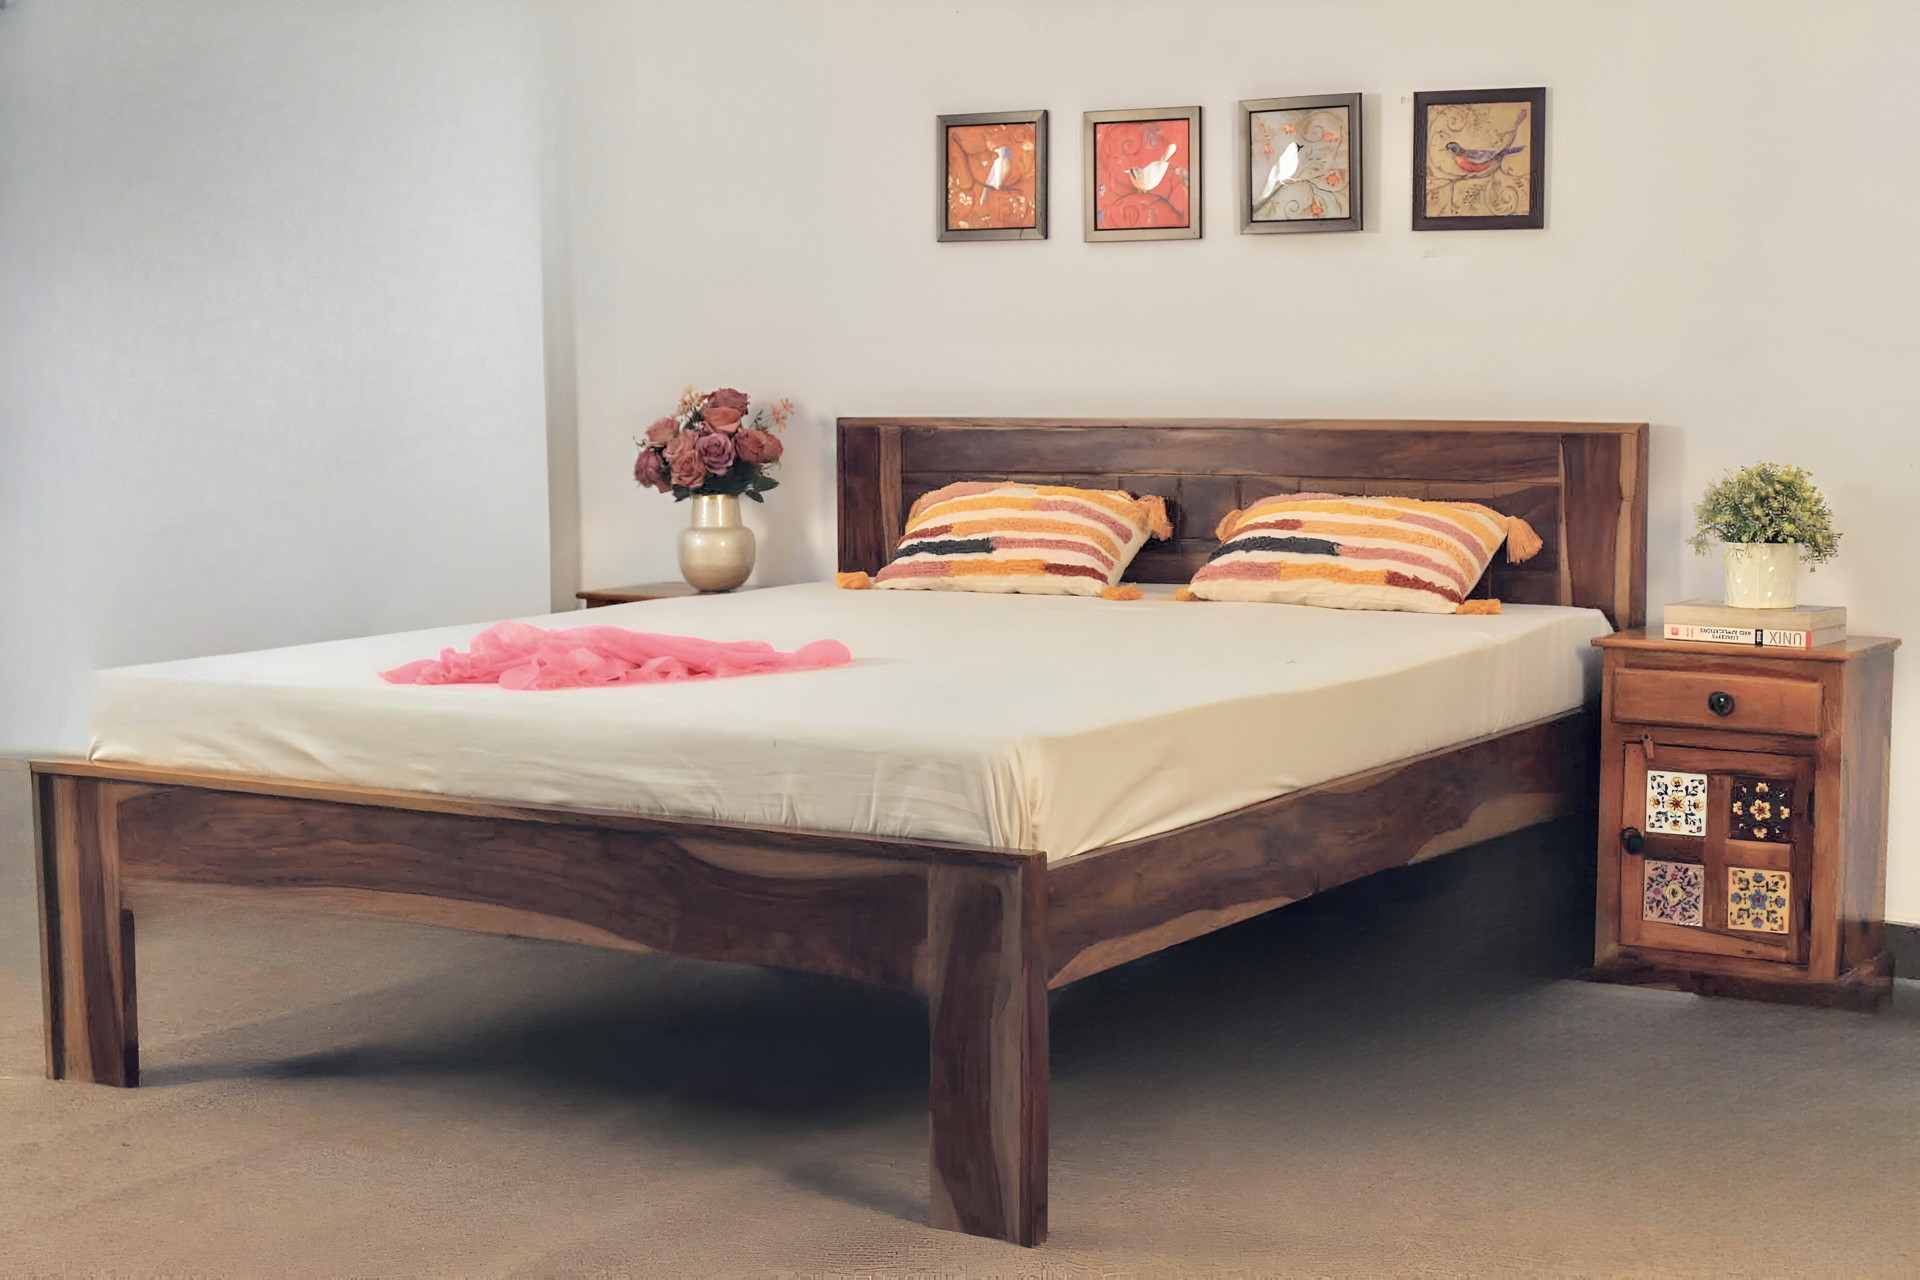 Elevate your bedroom with our affordable Arrow Budget Wooden Bed in Bangalore. Choose from king, queen, or double beds for a perfect blend of elegance. Upgrade your space today!